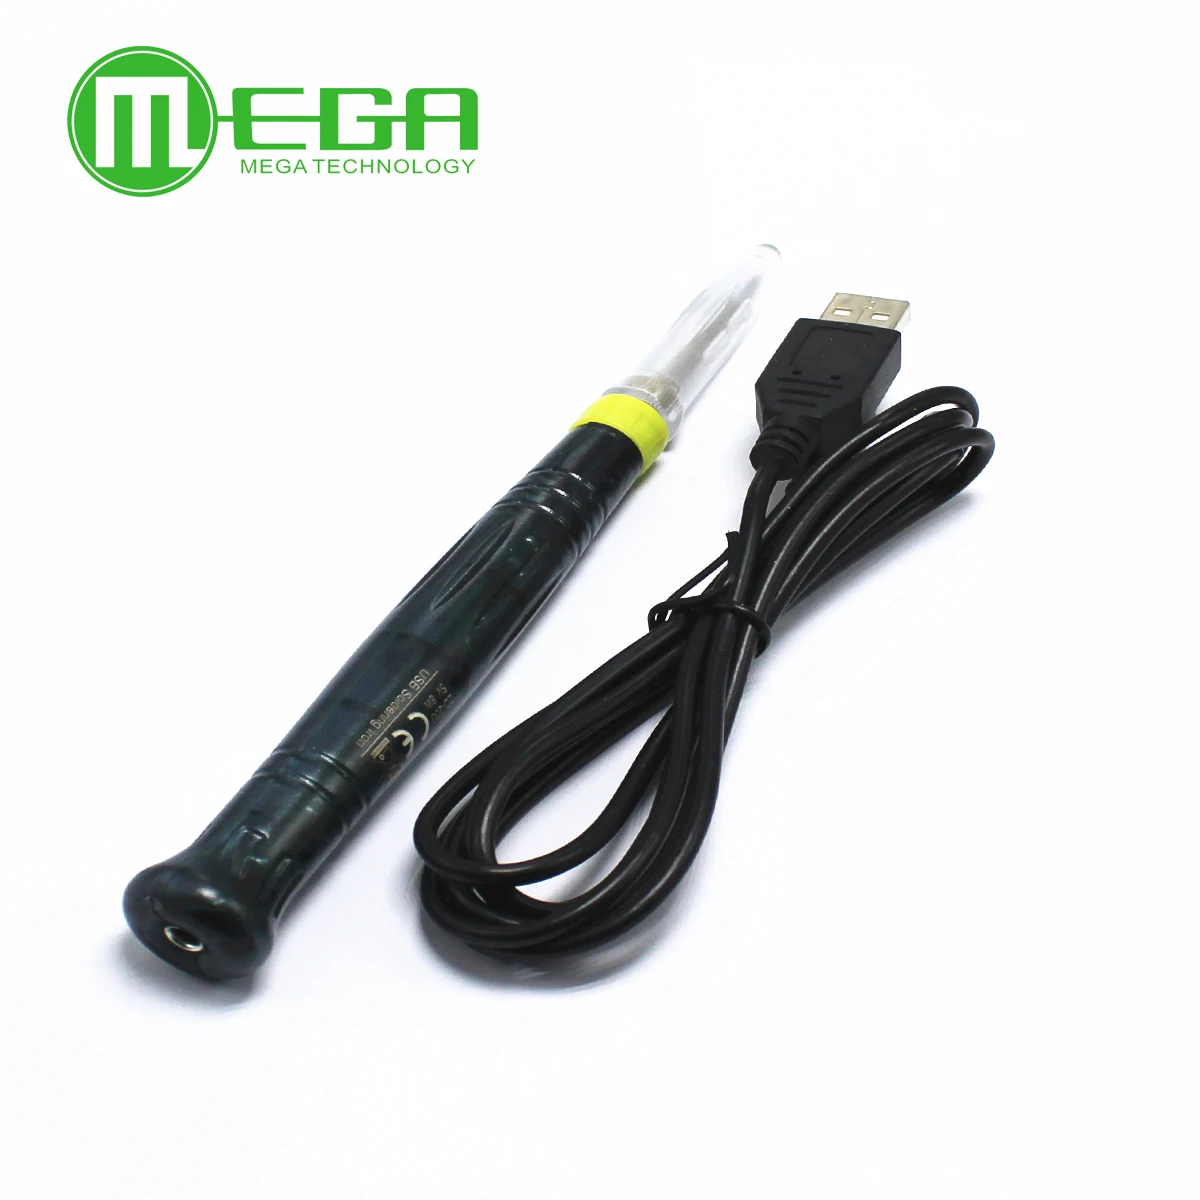 8W 5V 2A Electric Powered Soldering Iron Pen/Tip Mini USB-Portable S7Q6